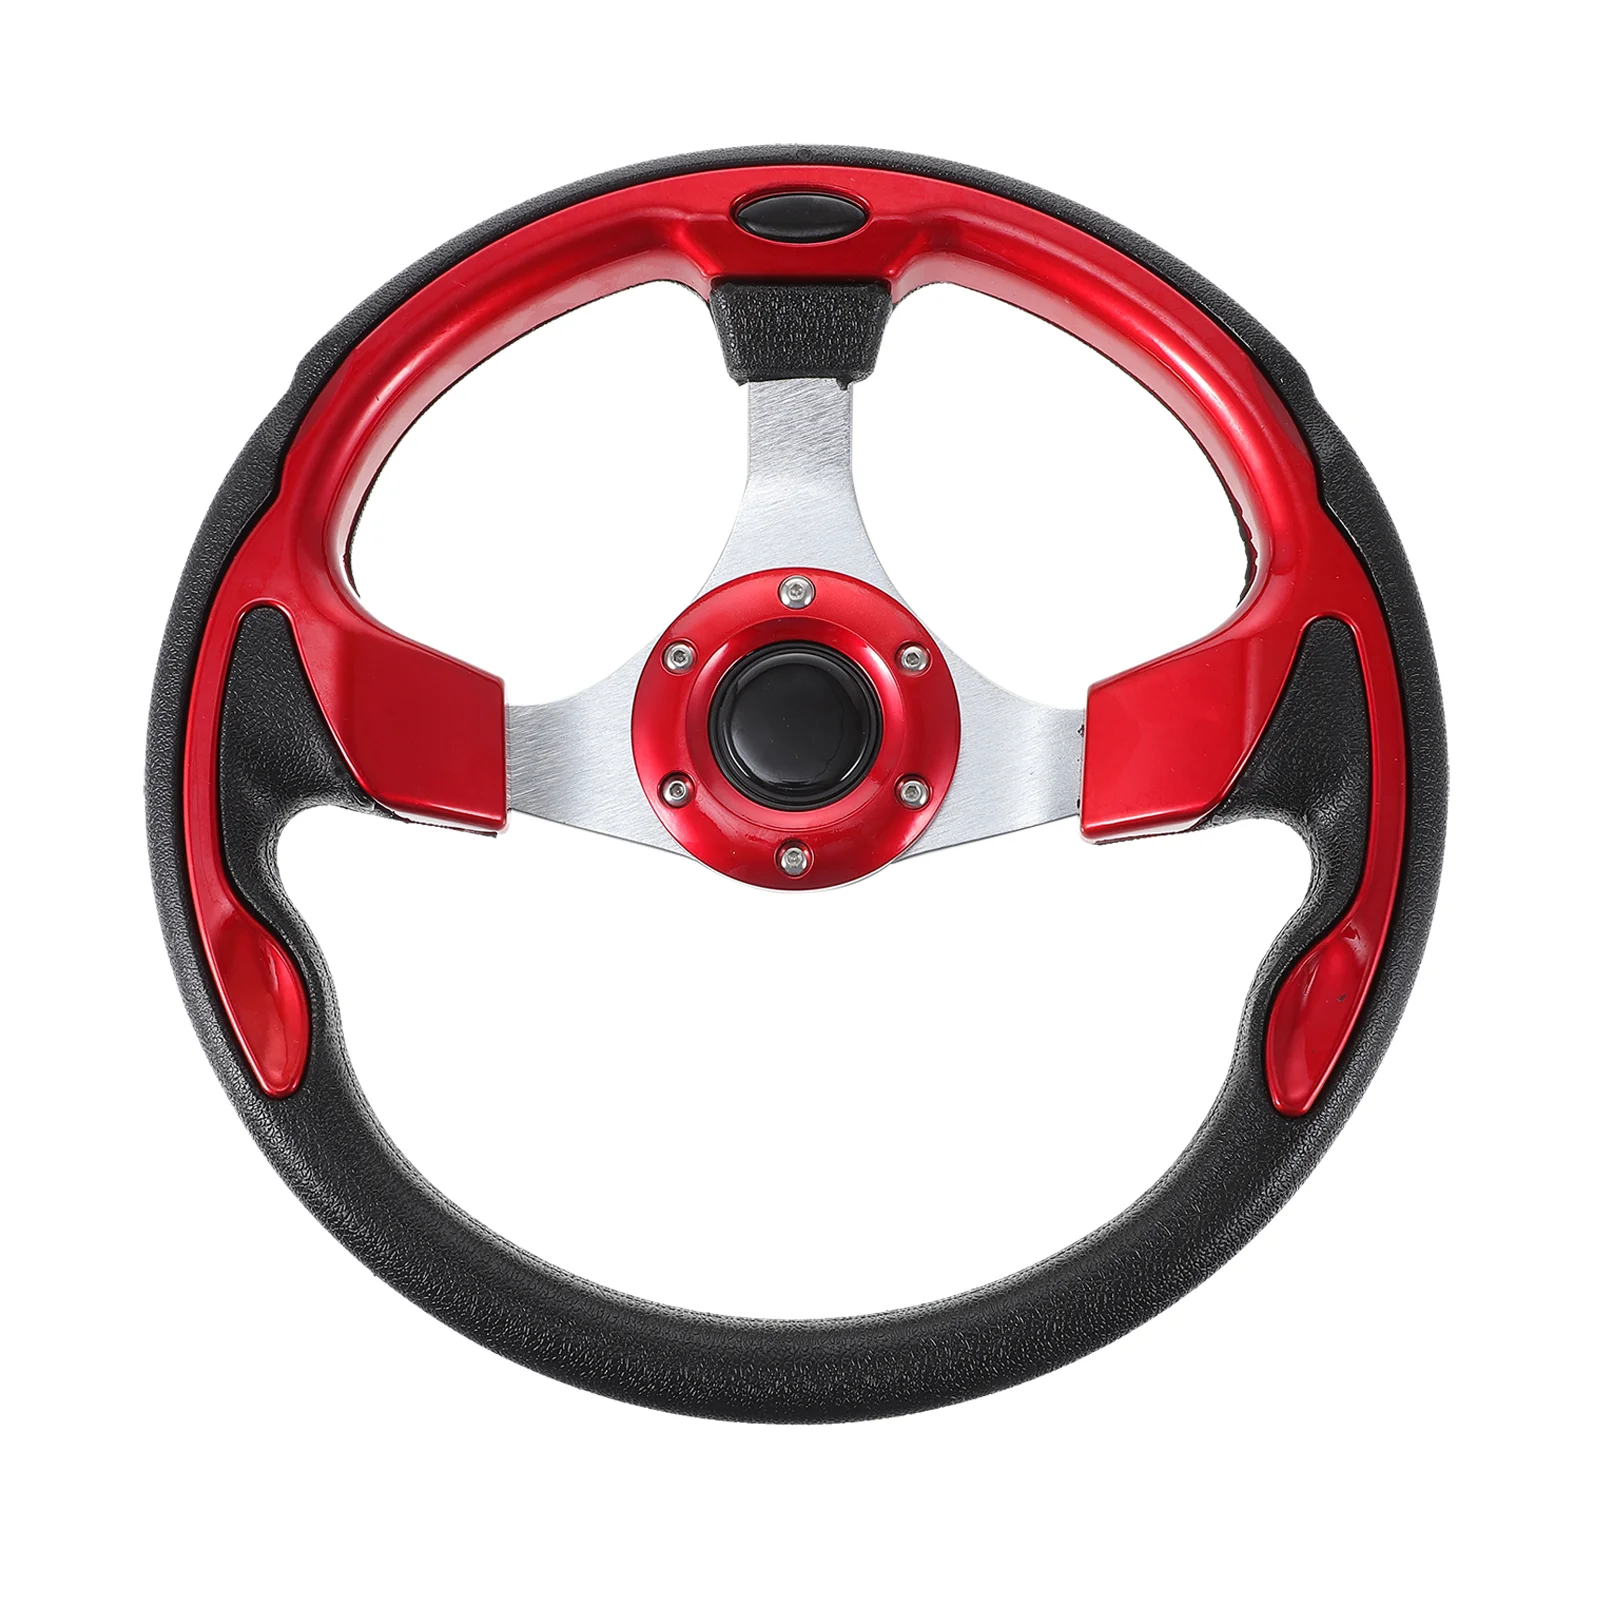 

Steering Wheel Racing Modified Car Automotive Wheels Quick Release Universal Replacement Drifting